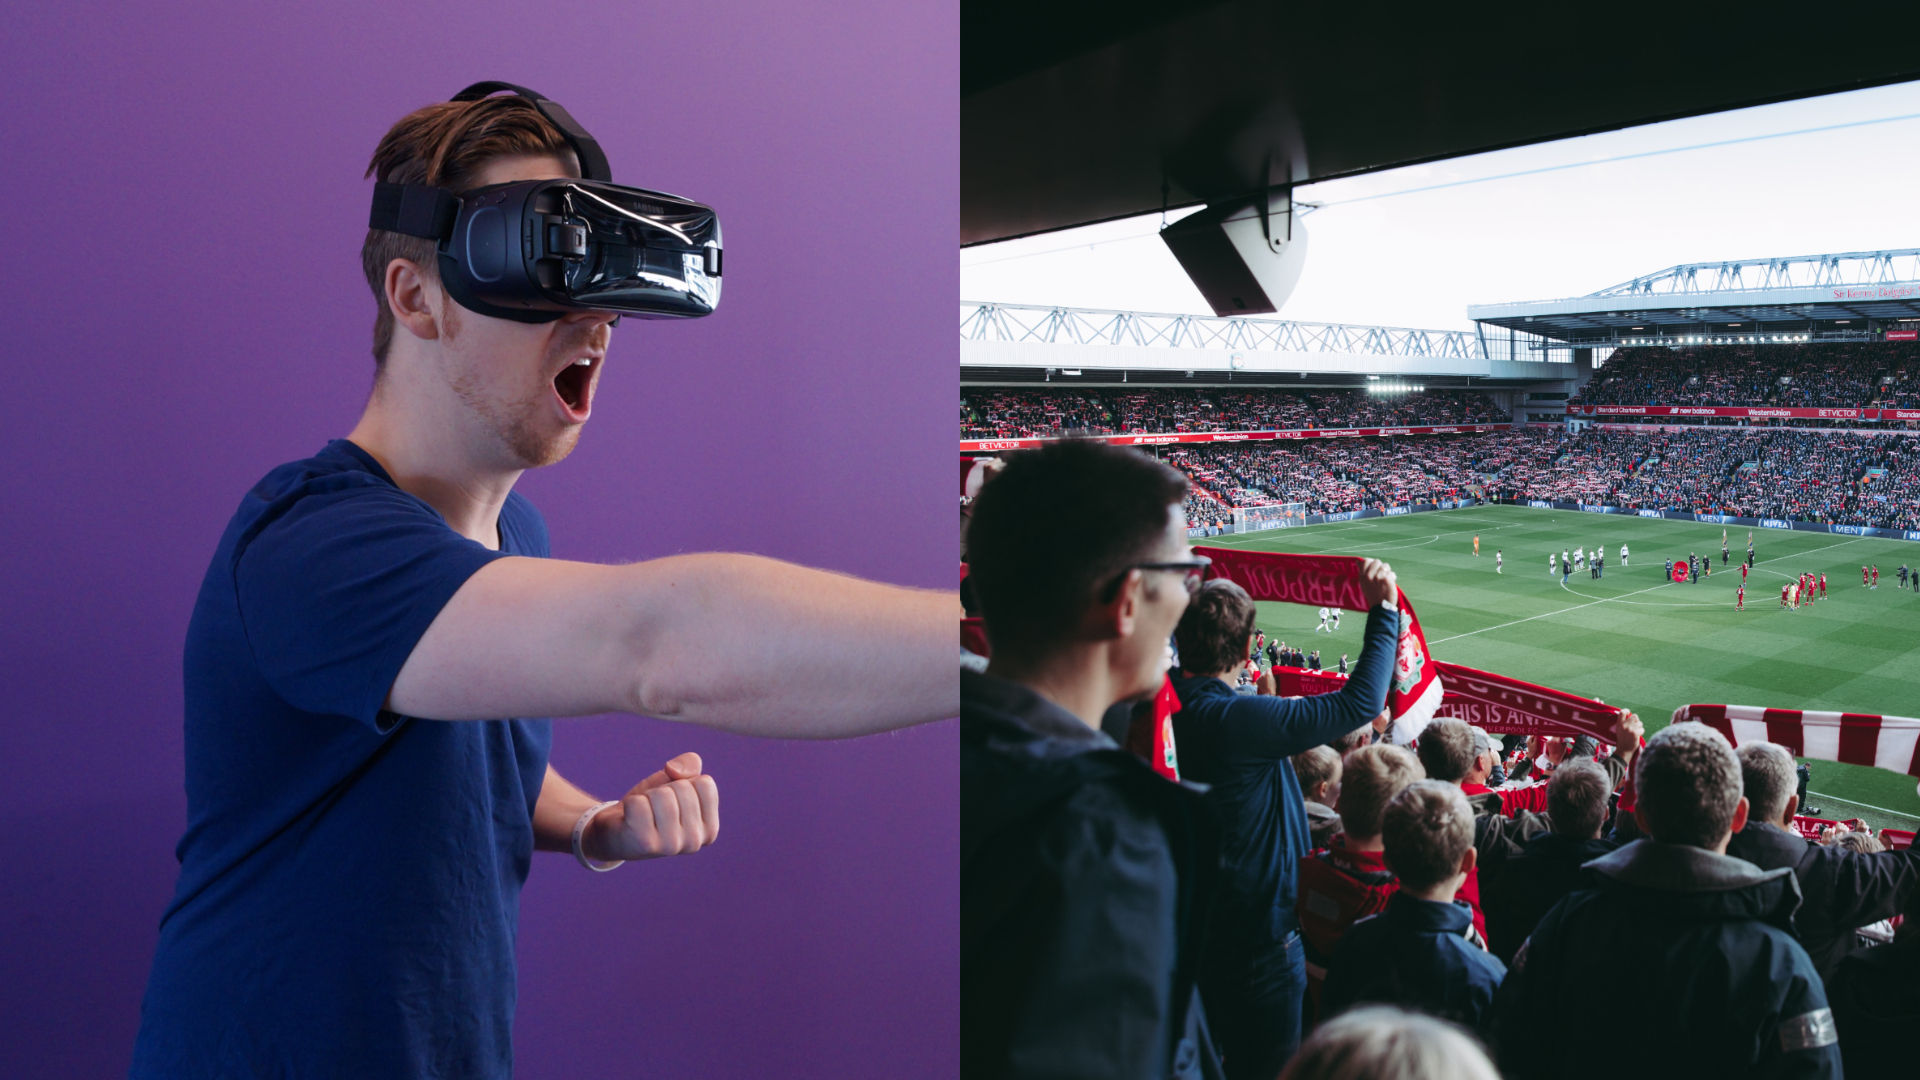 Metaverse Today: Manchester City, Sony Plan Virtual Stadium for Fans